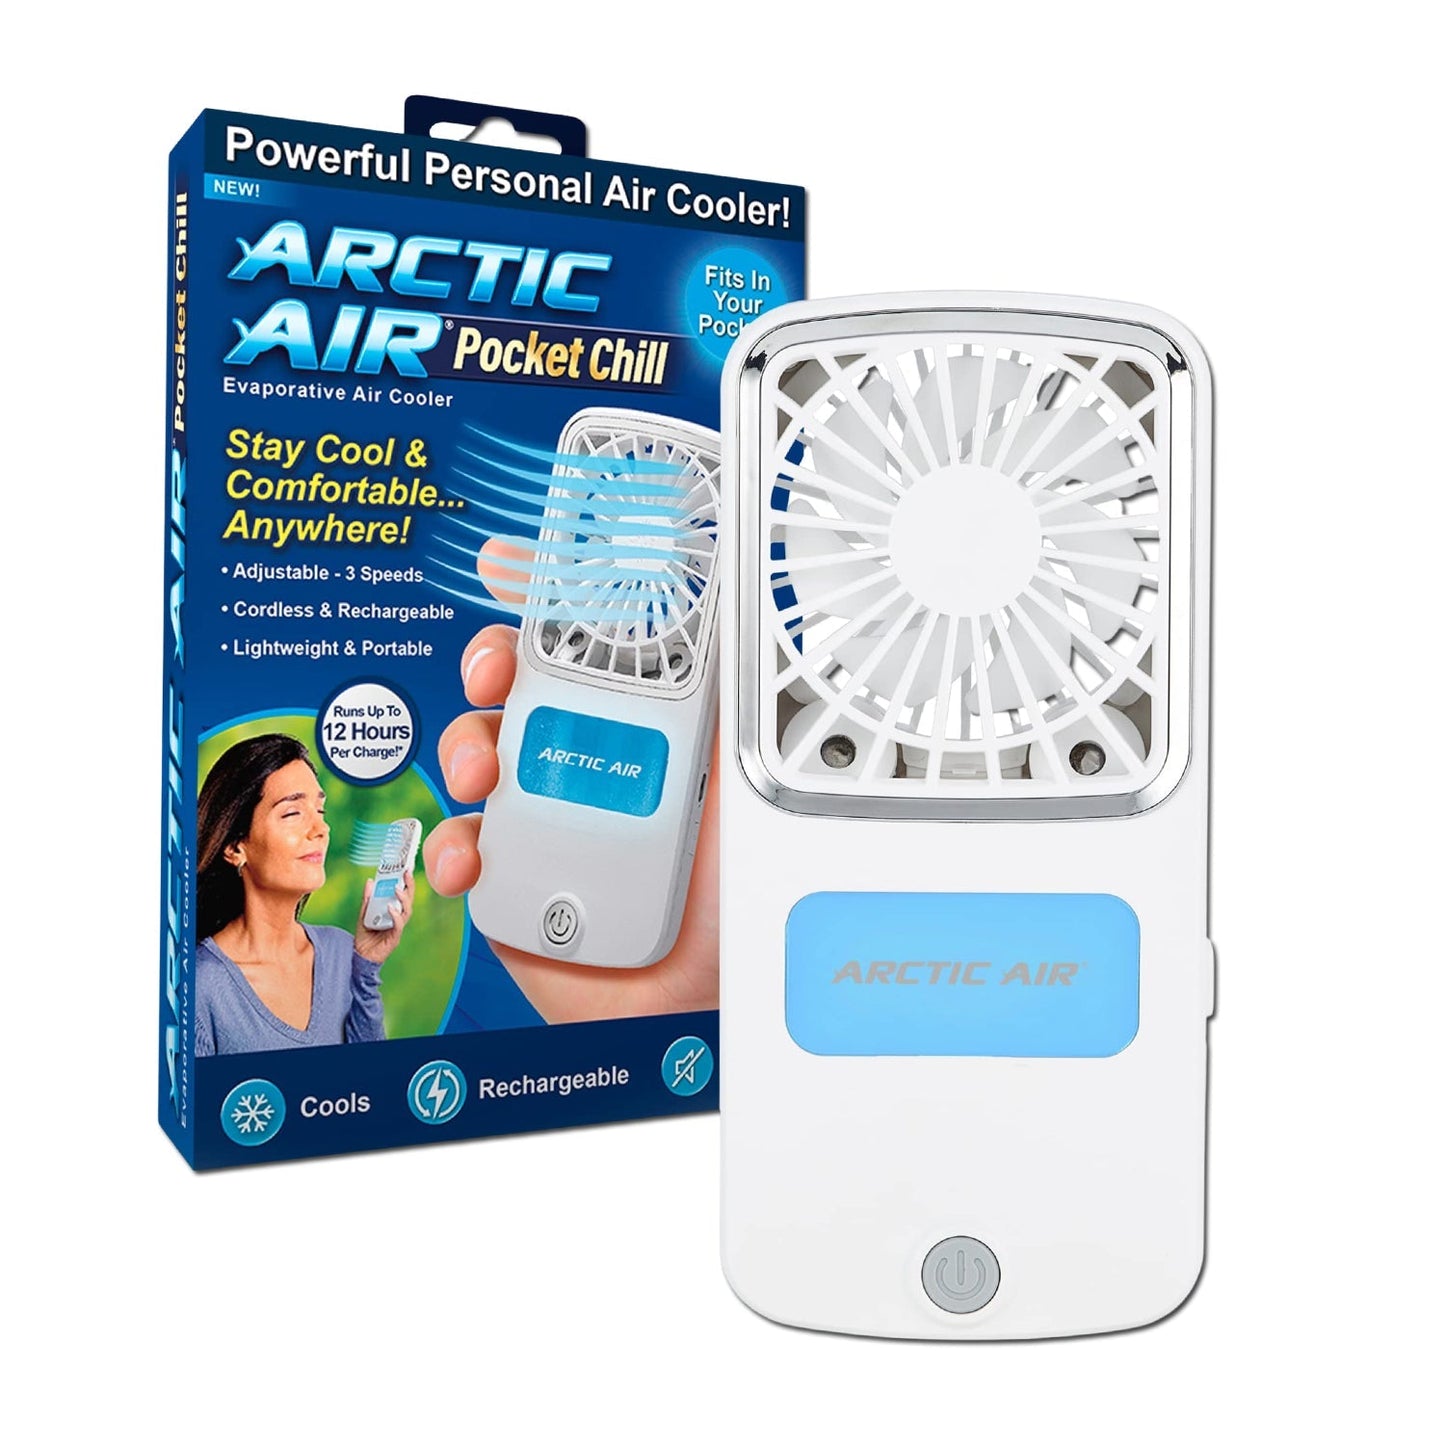 Arctic Air Freedom Portable Personal Air Cooler